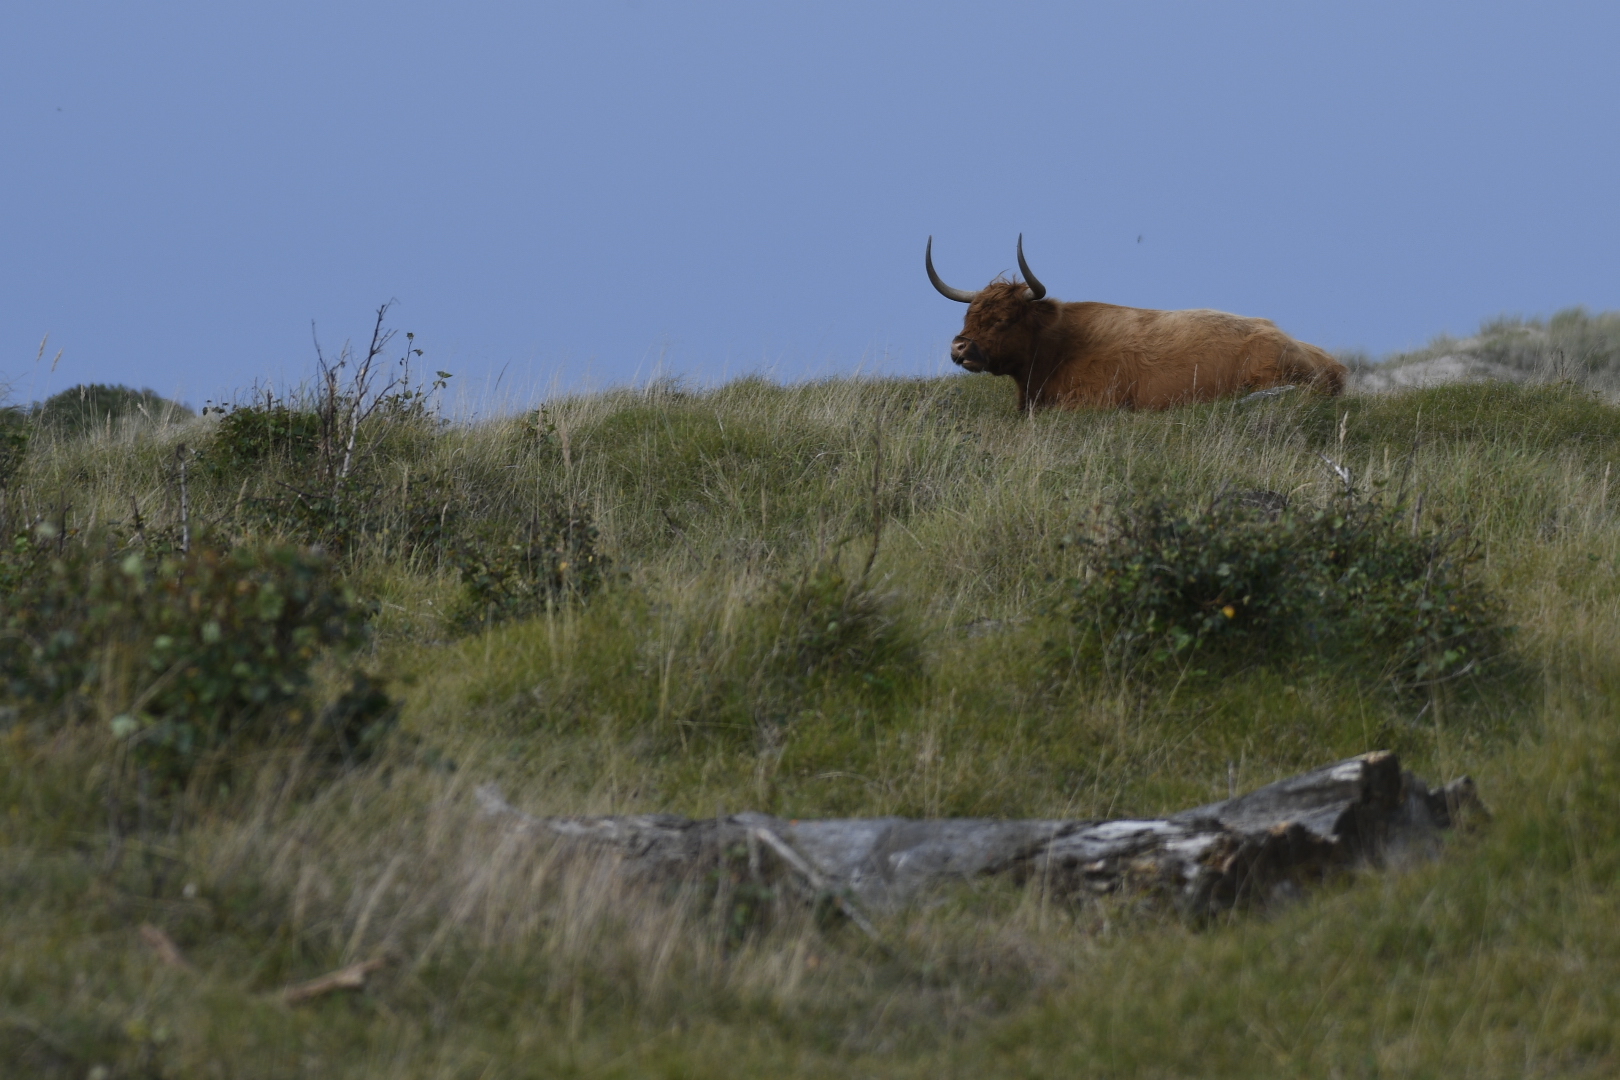 Large grazer used to maintain heathland at Denmark's Melby Overdrev (photo: author)